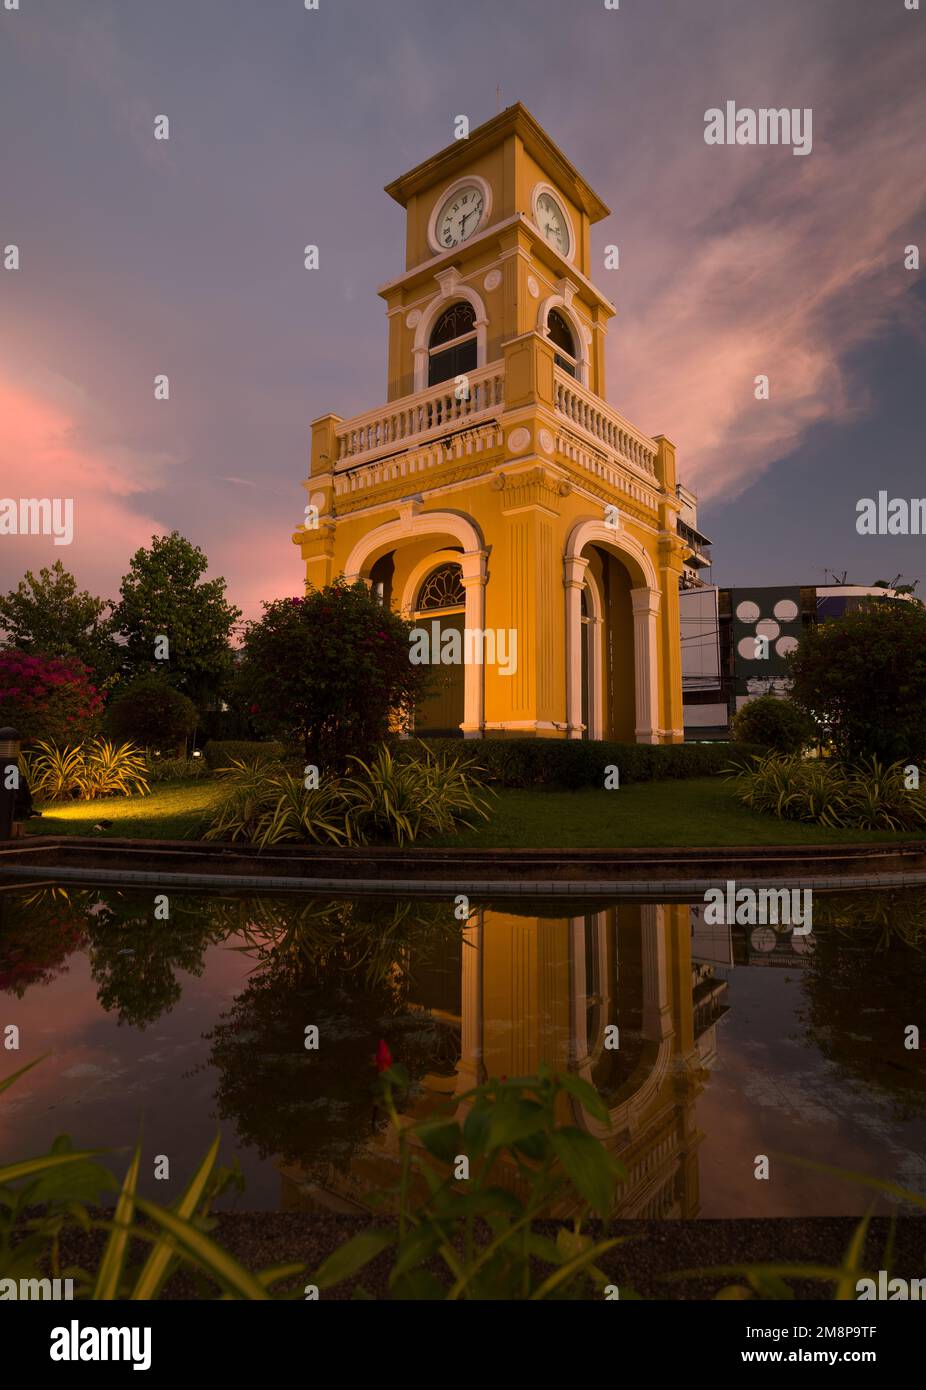 Phuket old town. Famous clock tower building at evening time. Sino-Portuguese Architecture. Top travel destinations in Thailand Stock Photo